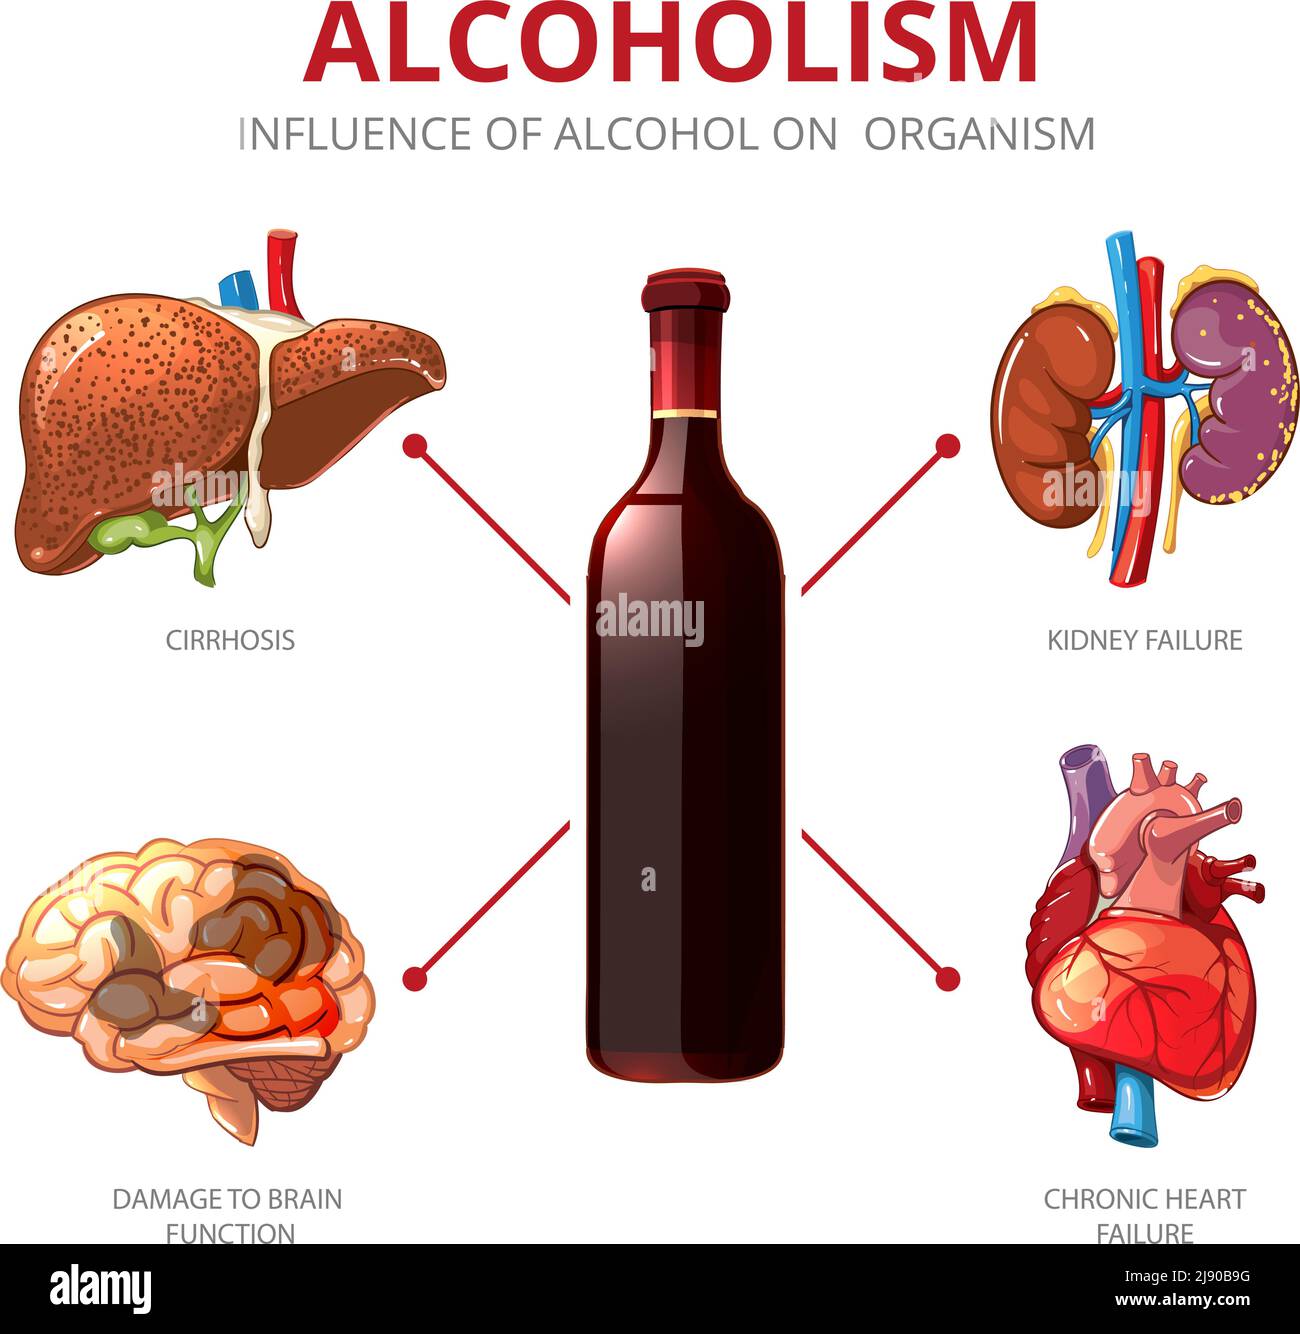 Long-term effects of alcohol. Organism function and brain damage, failure kidney illustration. Alcoholism vector infographic Stock Vector